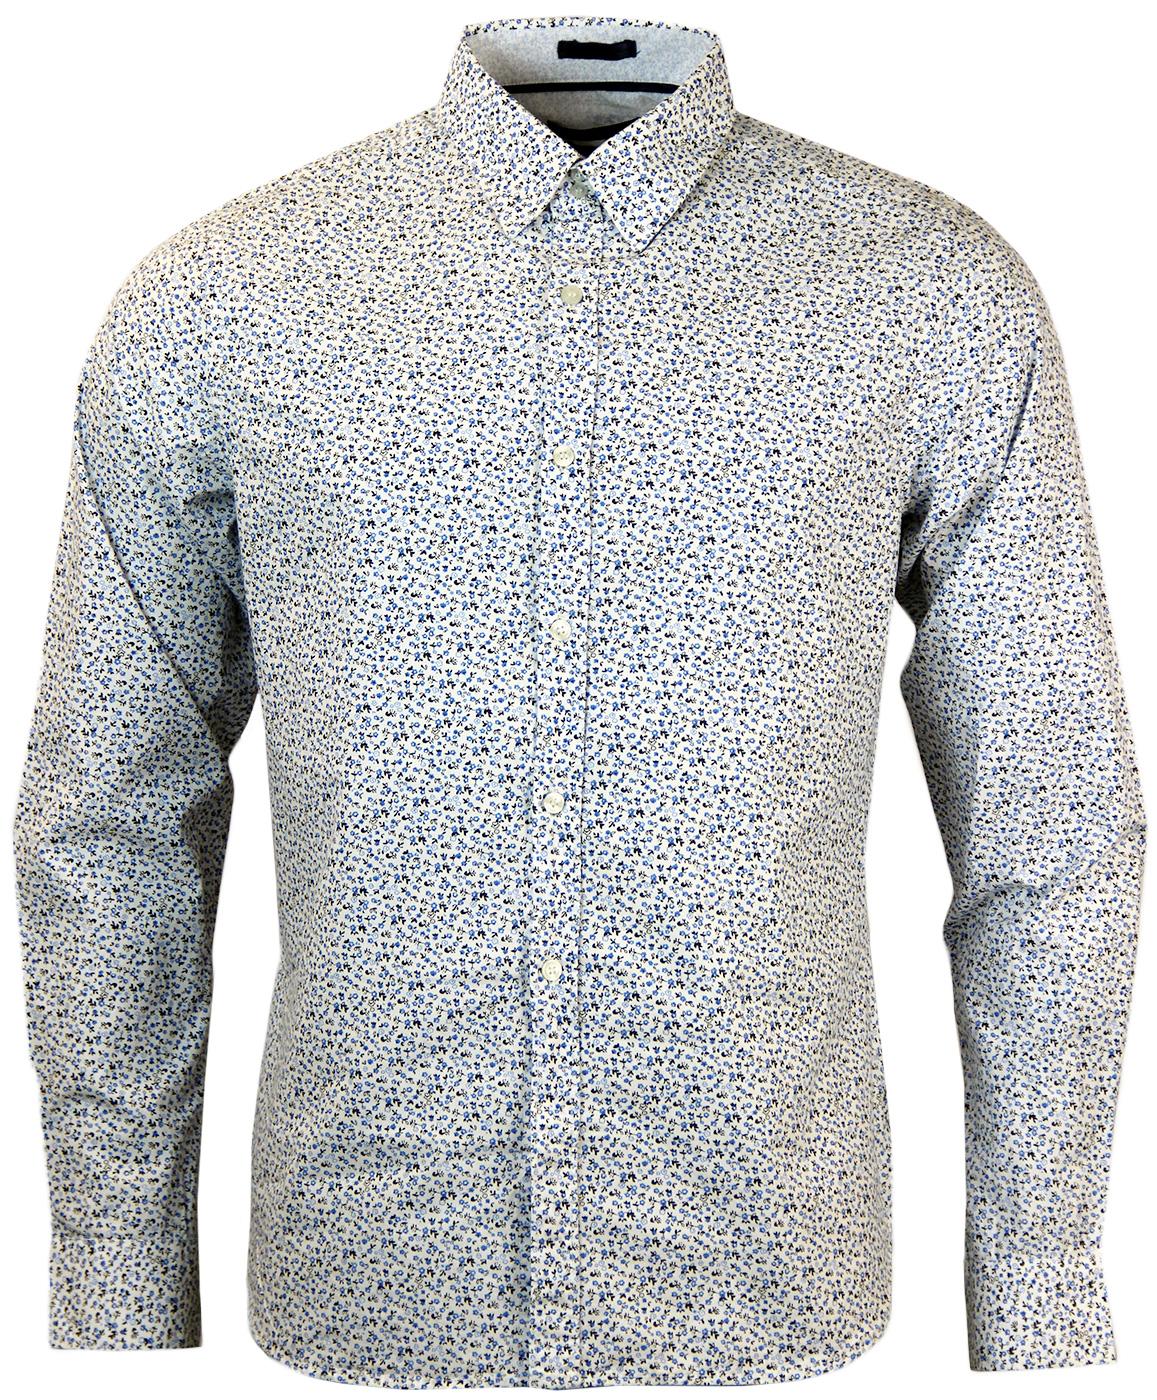 FRENCH CONNECTION Retro Mod 60s Mini Floral Shirt in White